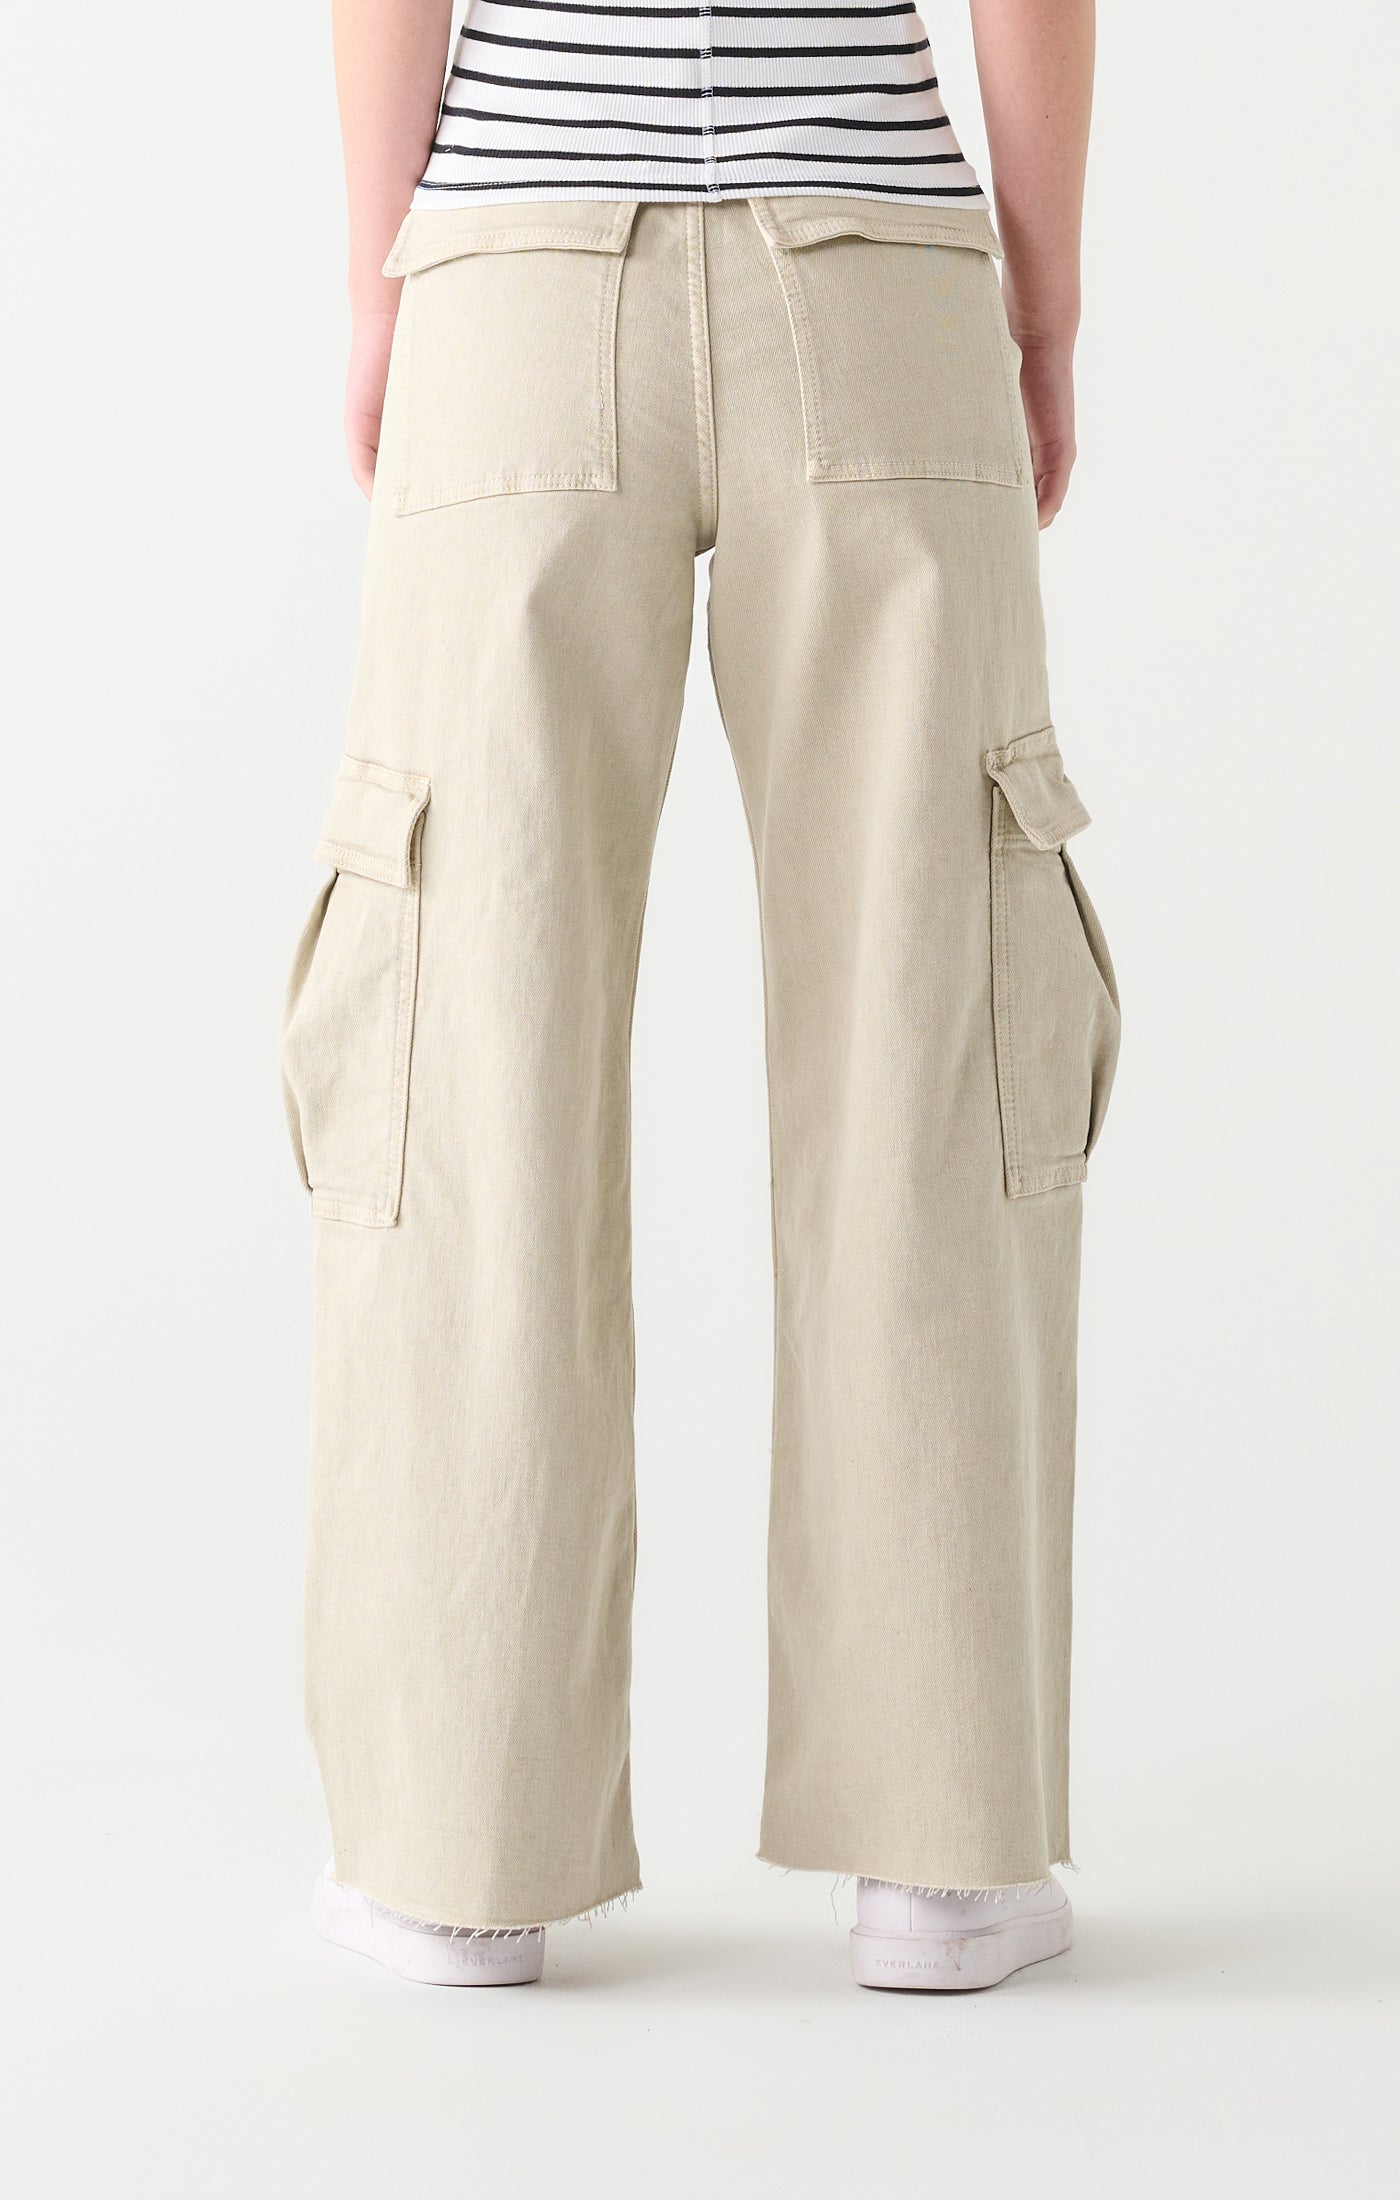 UNLINED CARGO PANT WITH REFLECTIVE STRIPES FOR WOMEN - Jackfield